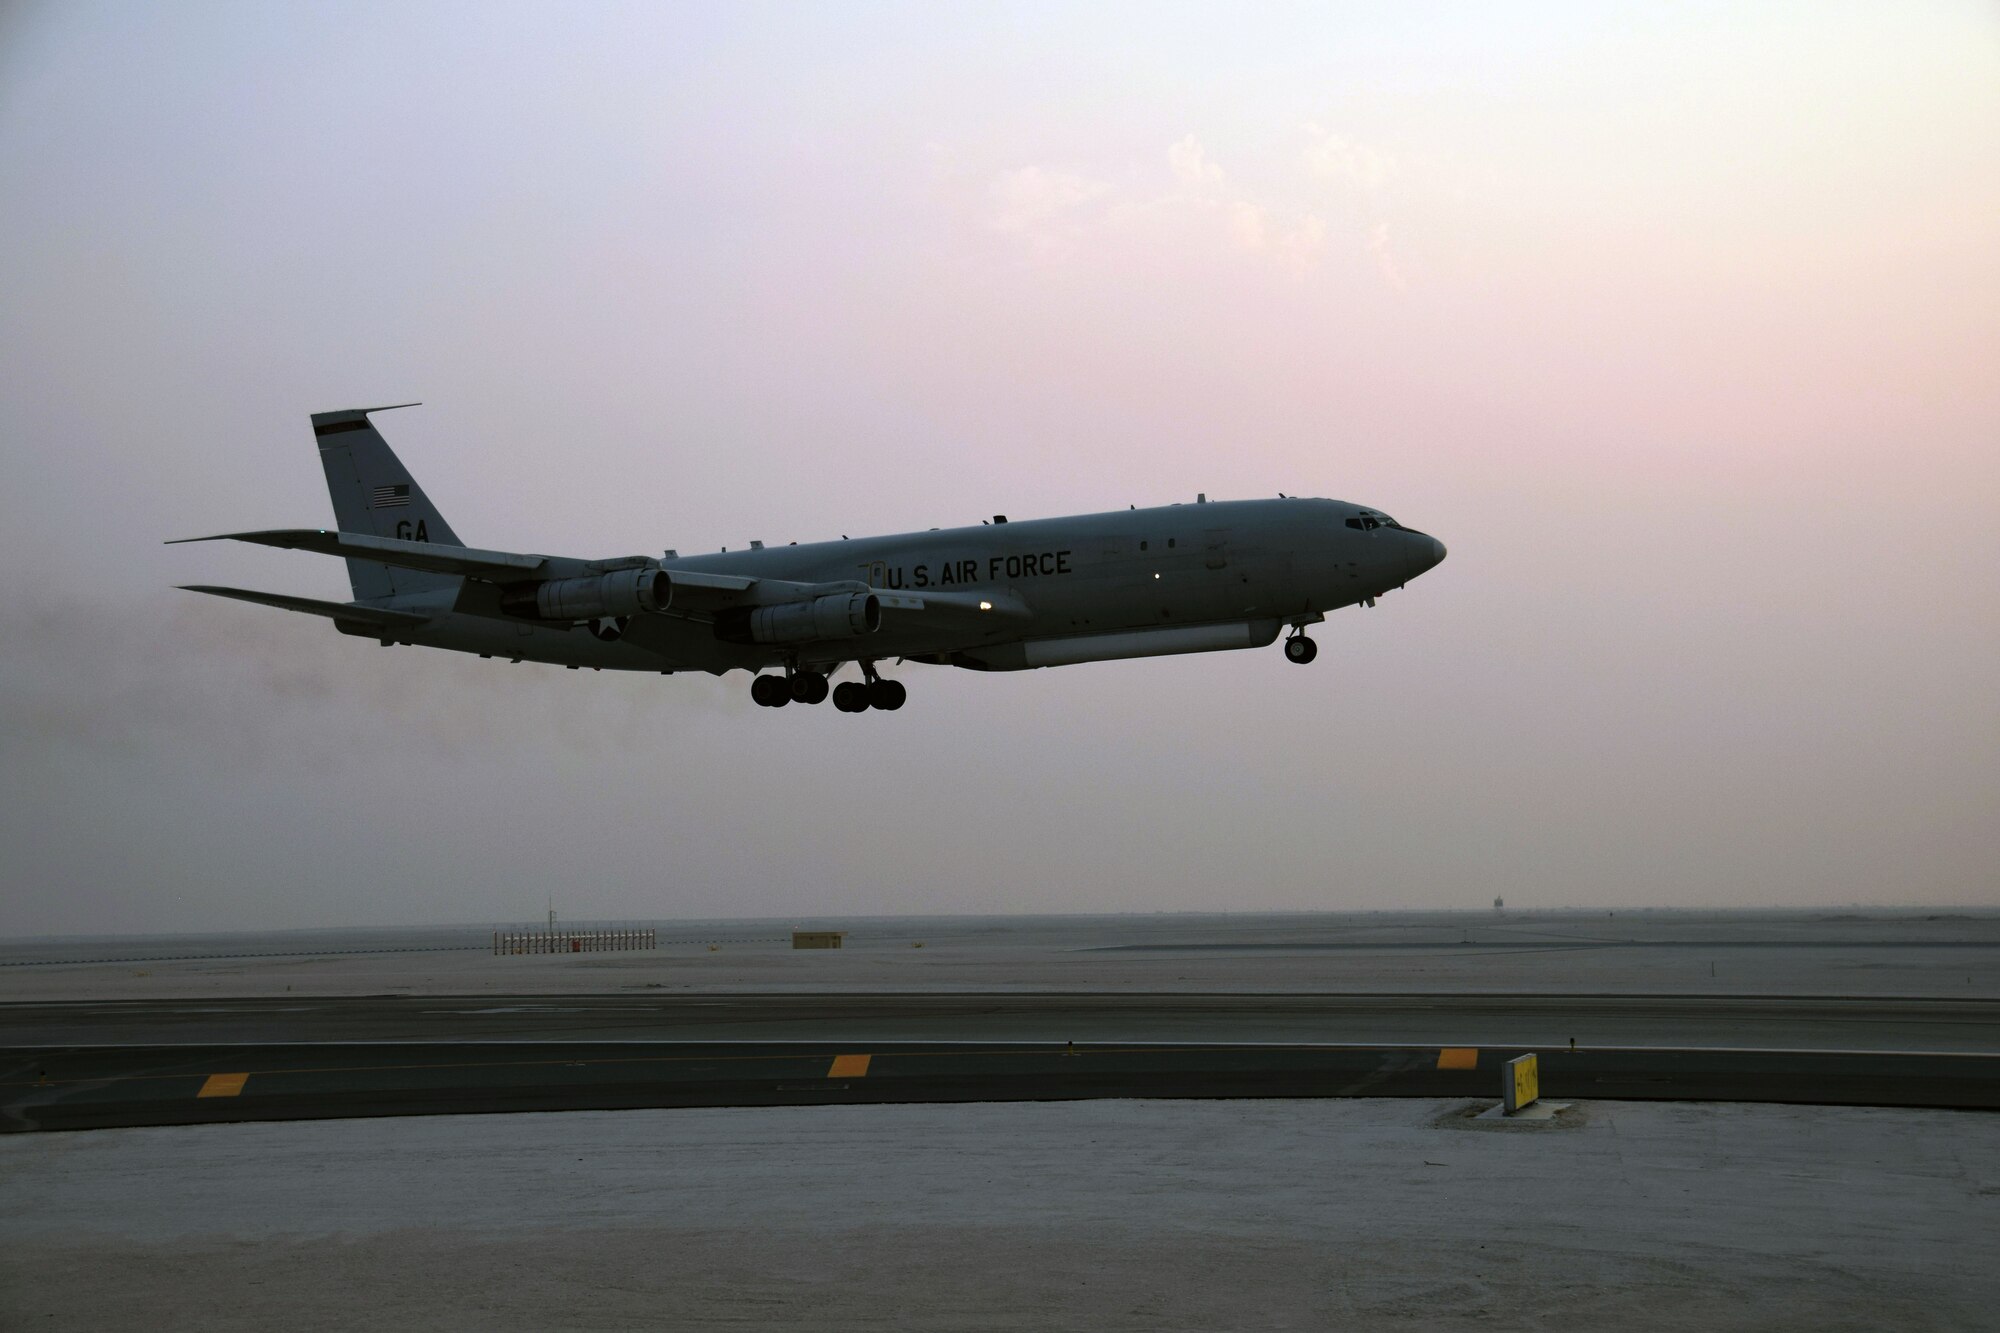 An E-8C Joint Surveillance Target Attack Radar System from the 7th Expeditionary Airborne Command and Control Squadron touches down after a mission on Sept. 12, 2016, at Al Udeid Air Base, Qatar. TheE-8C JSTARS is a joint U.S. Air Force and U.S. Army program that detects, tracks and clasifies moving ground vehicles in all conditions deep behind enemy lines by using a multi-mode side looking radar. The system evolved from Army and Air Force programs to develop, detect, locate and attack enemy armor at ranges beyond the forward area of troops. (U.S. Air Force photo/Tech.Sgt. Carlos J. Trevio/Released)